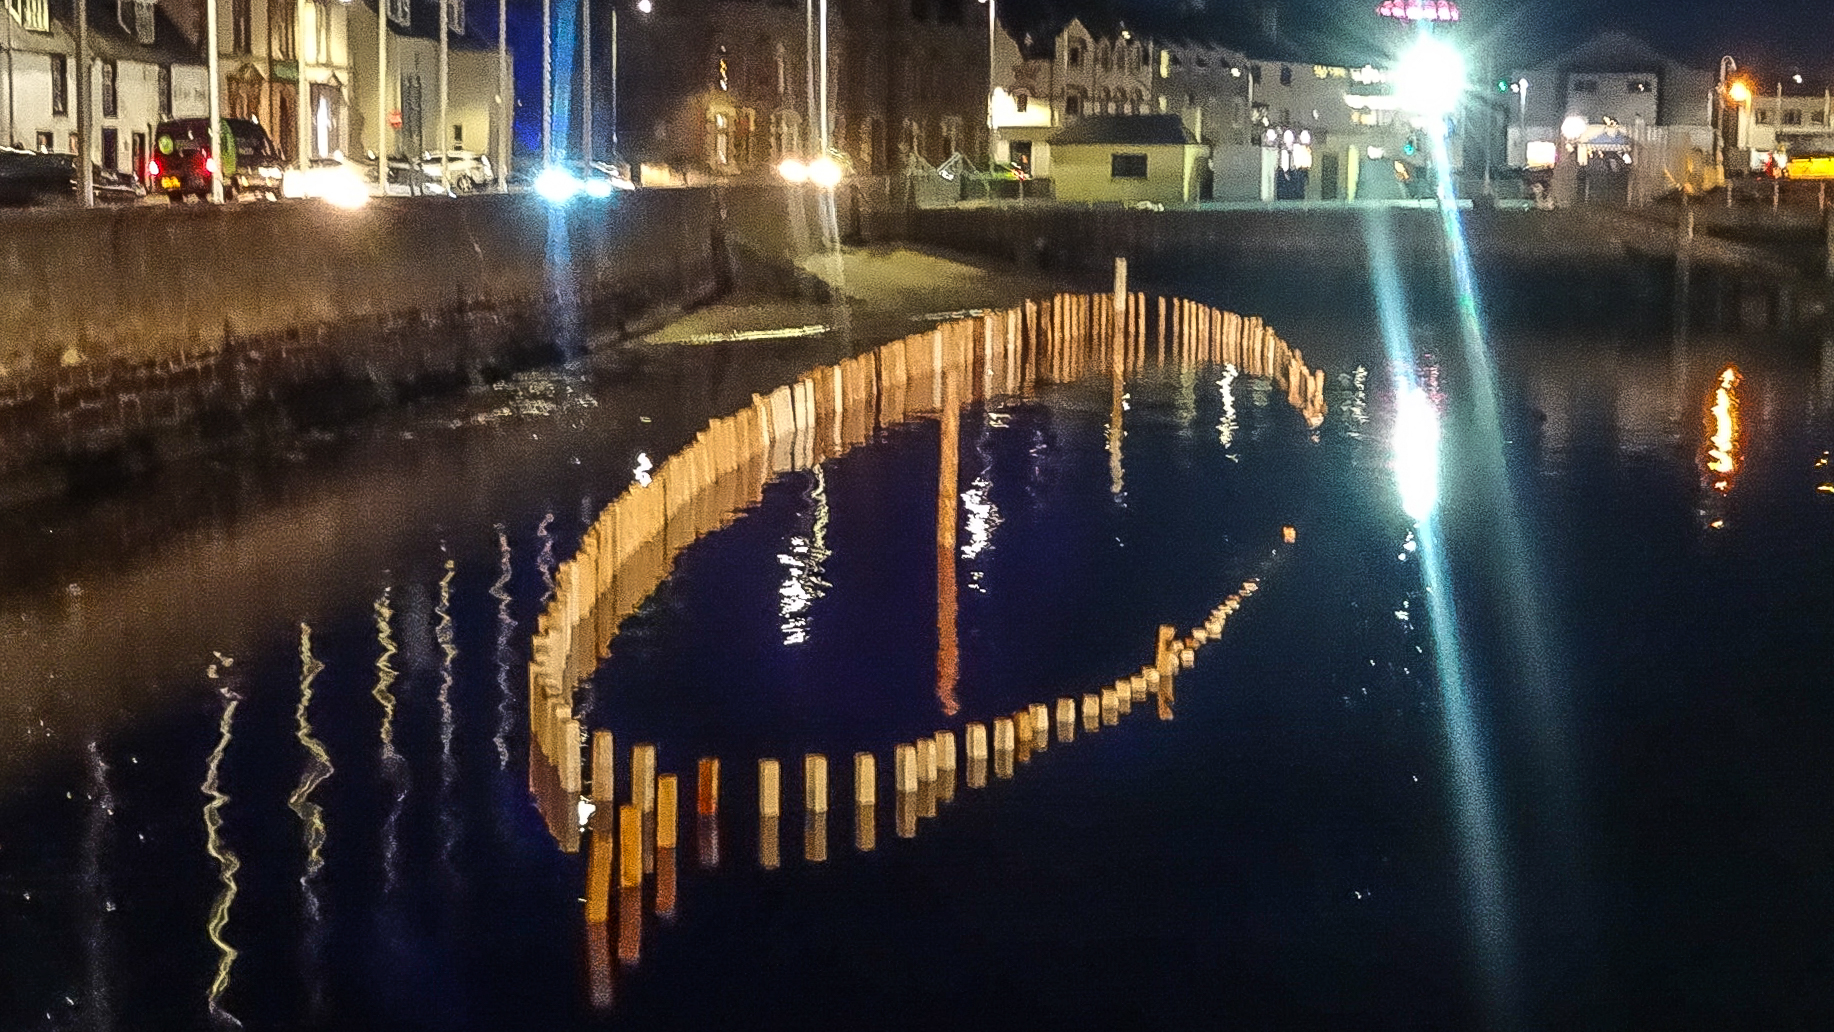 Stornoway Port Authority created the wooden monument in December  in tribute to those lost during the Iolaire disaster.